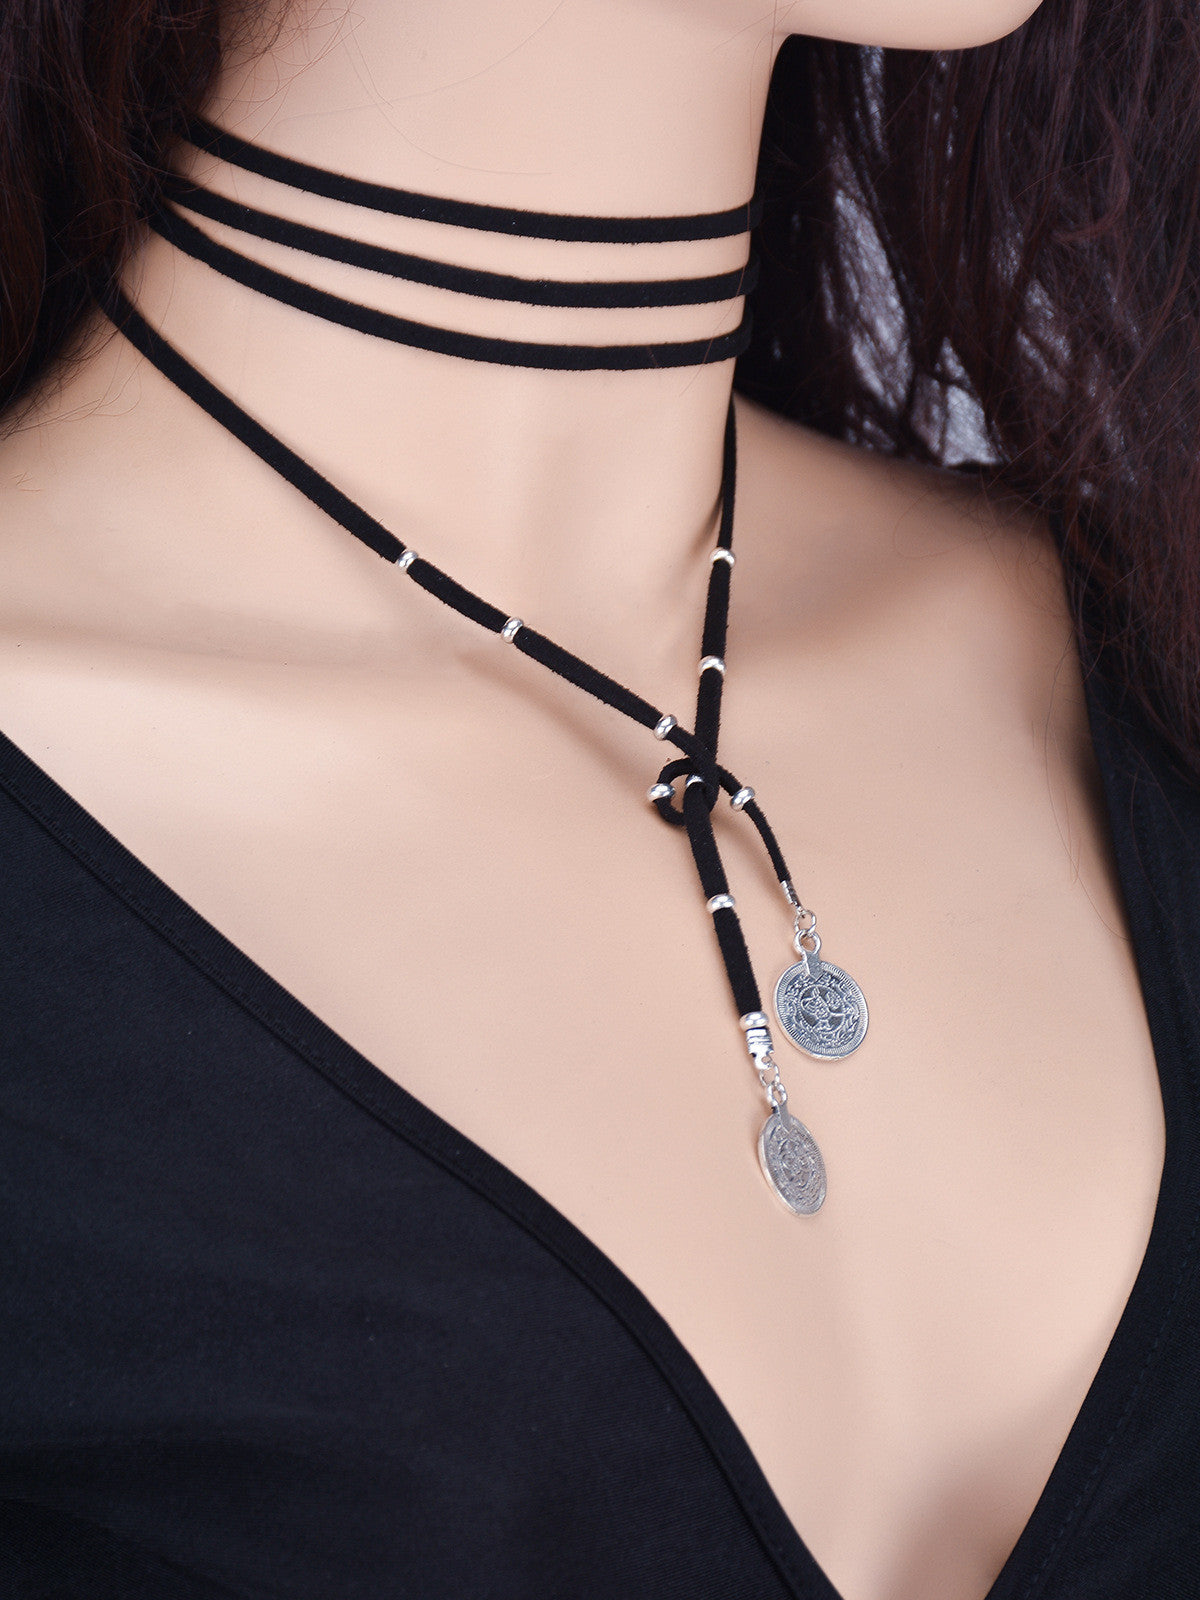 Fashion Lint Coin Tassel Necklace - Oh Yours Fashion - 2